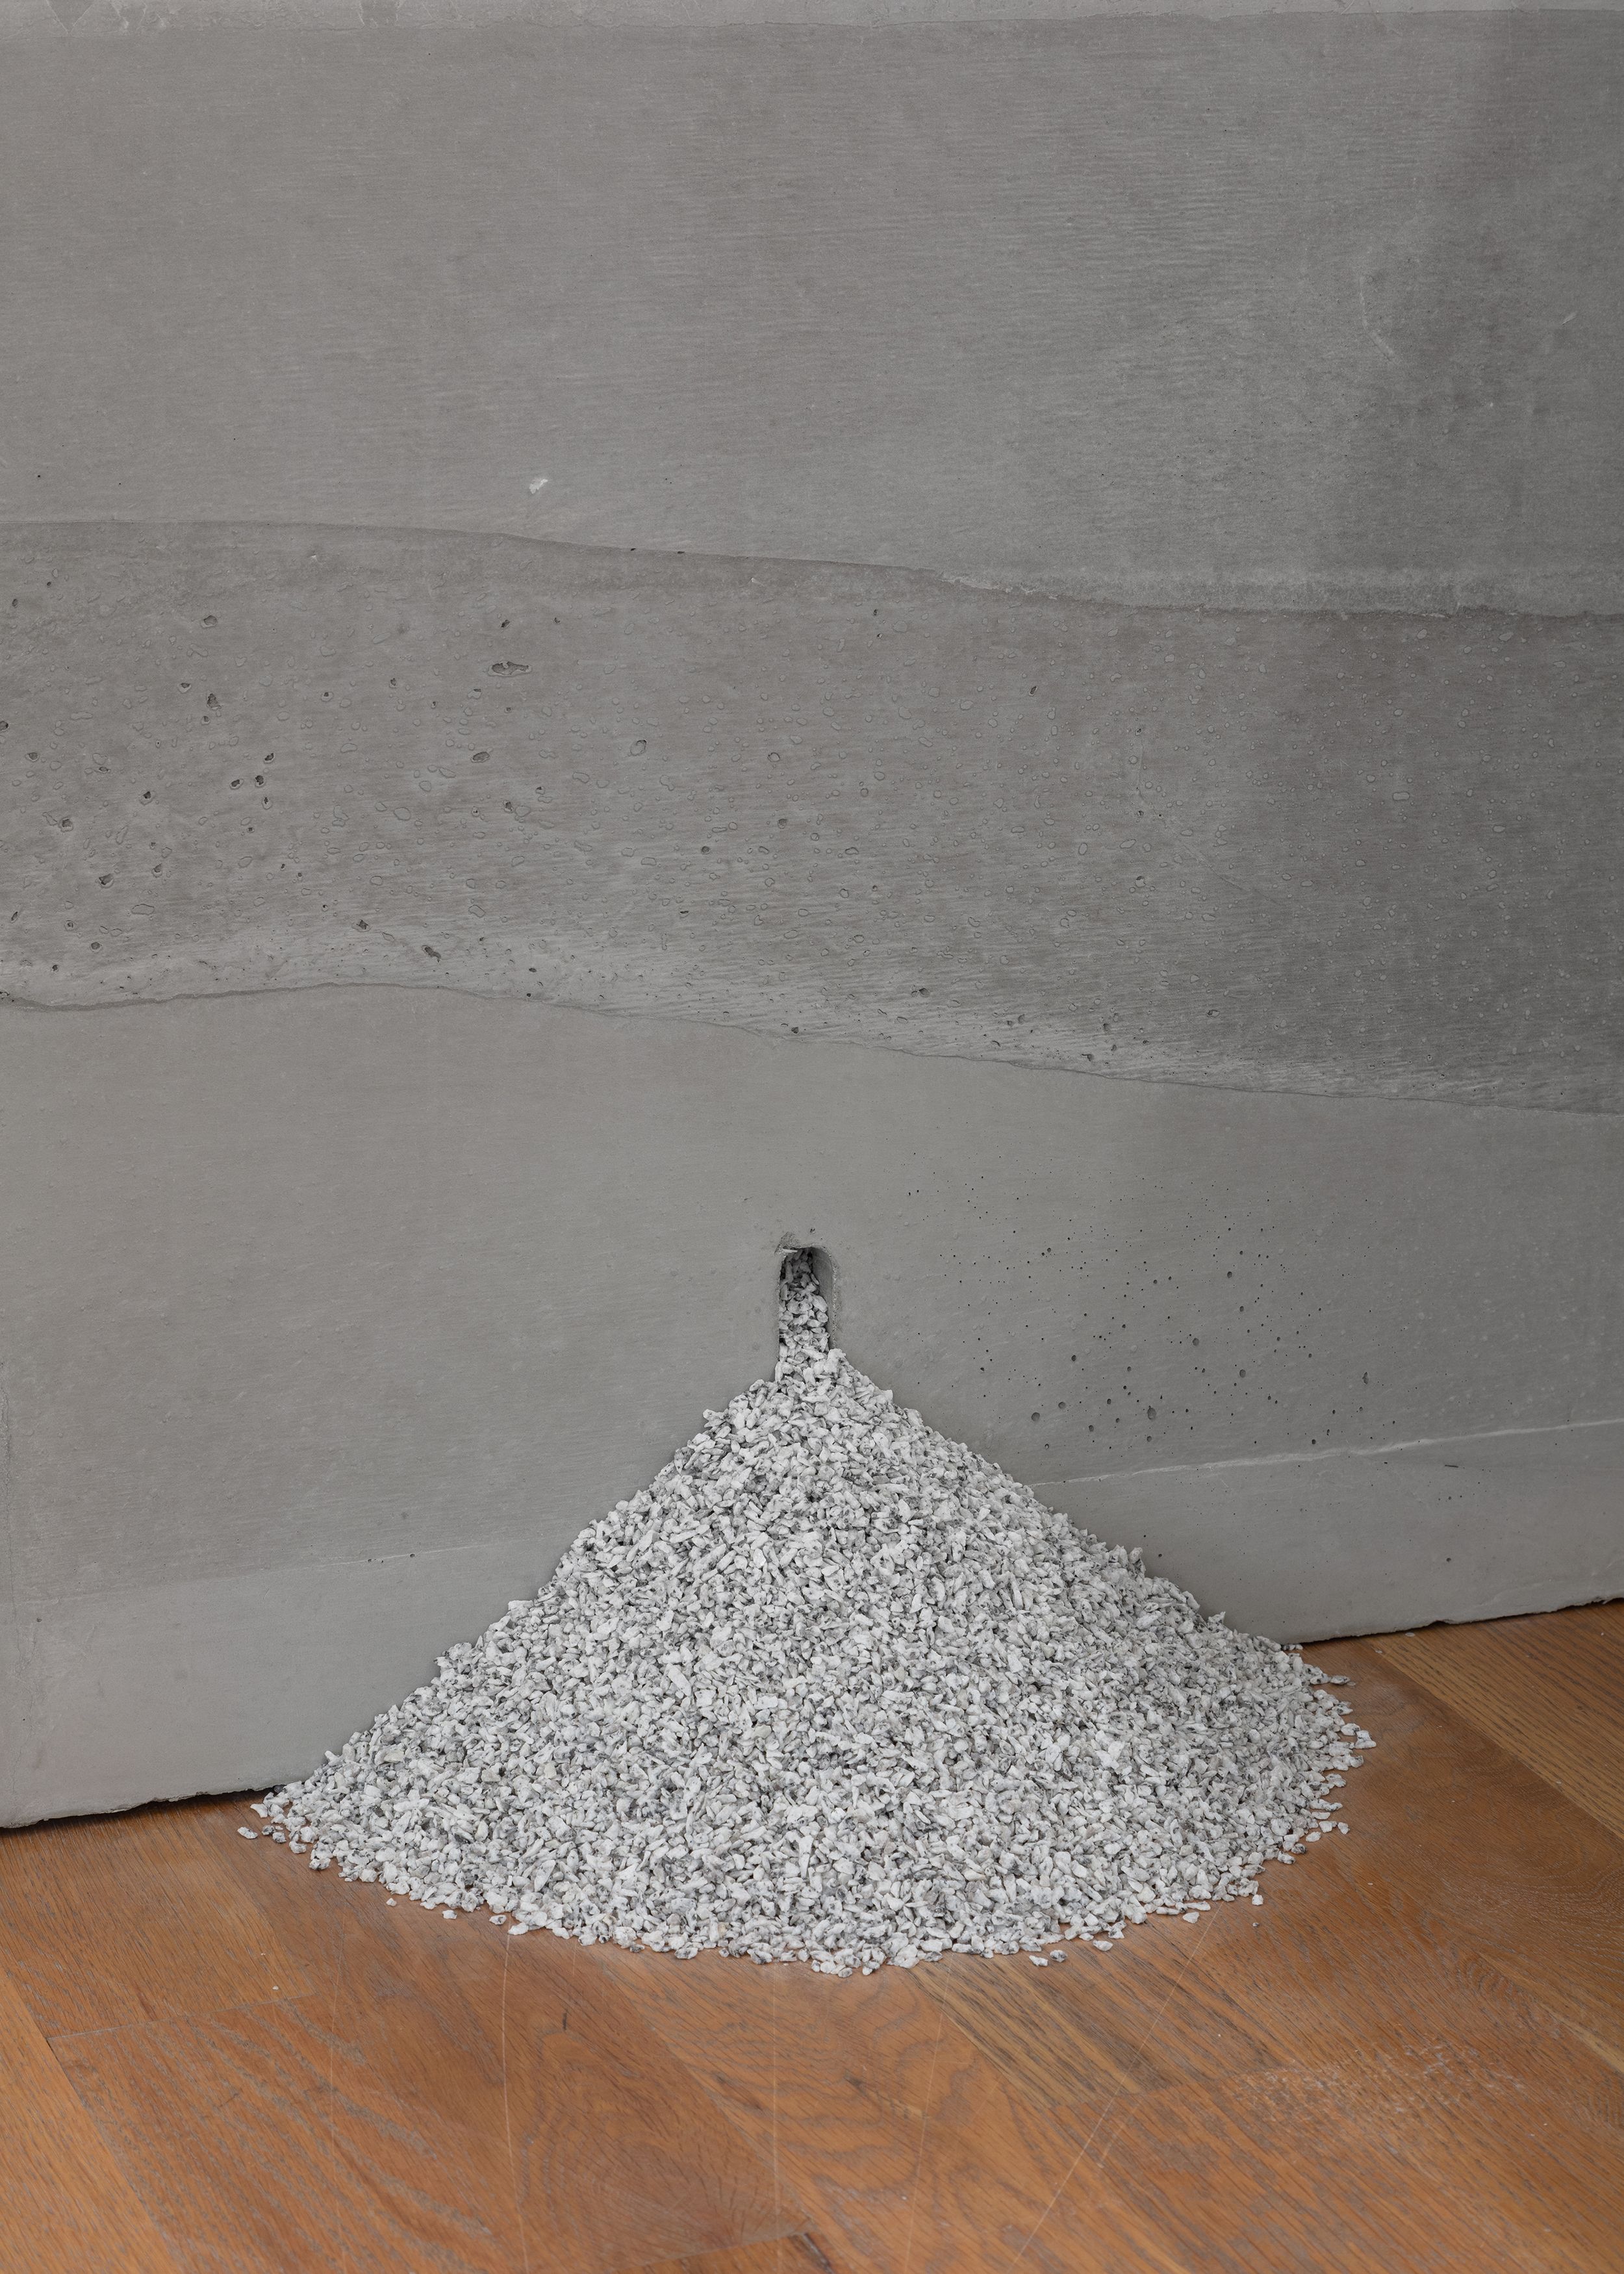 Stephen Lichty, Repose 2, 2021, concrete and crushed granite, 44 x 76 7/8 x 77 in. (111.76 x 195.26 cm)